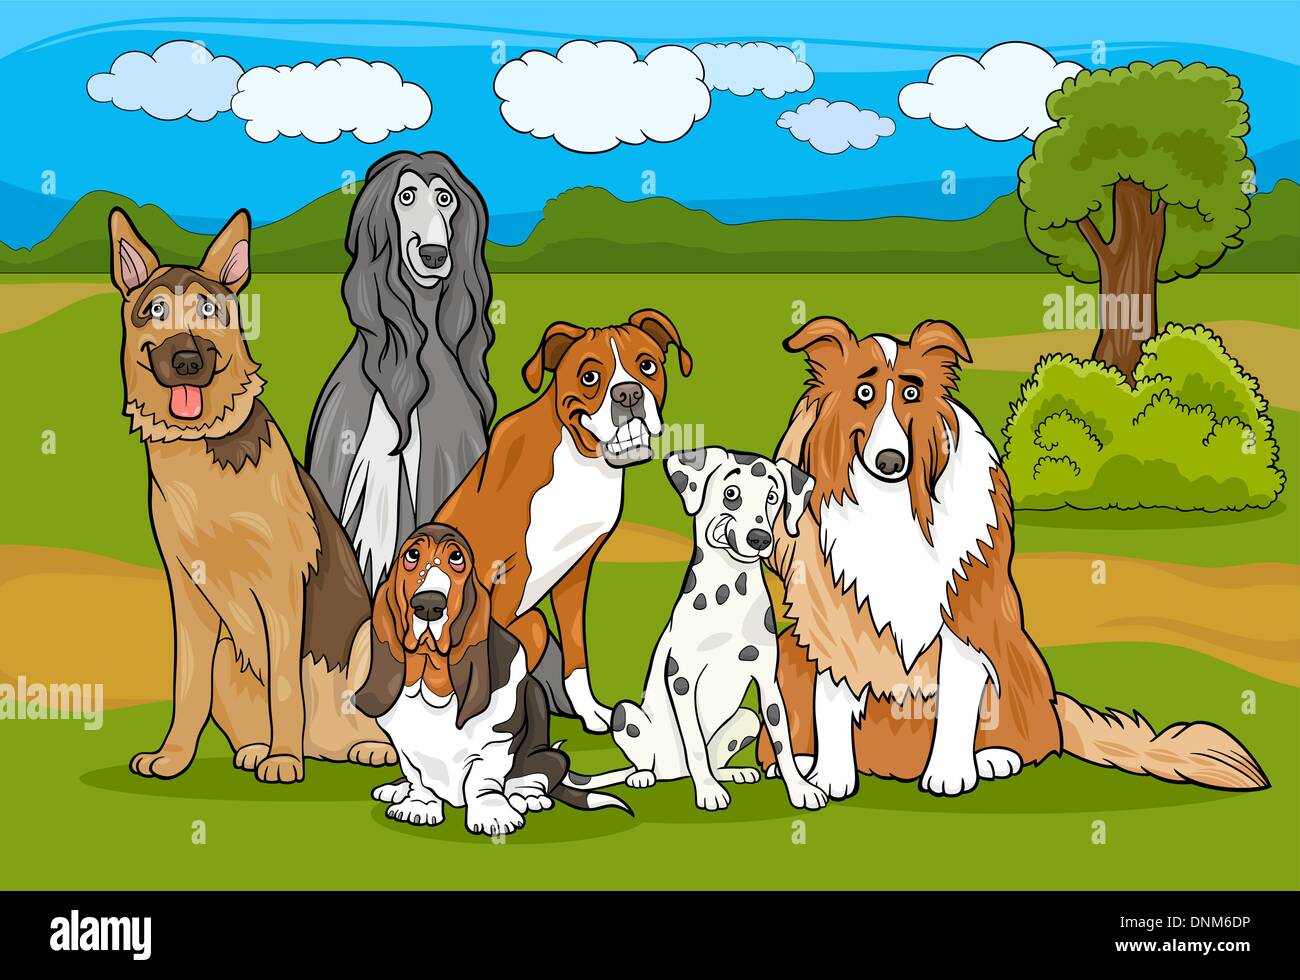 Cartoon Illustration of Cute Purebred Dogs or Puppies Group against Rural Landscape or Park Scene Stock Vector